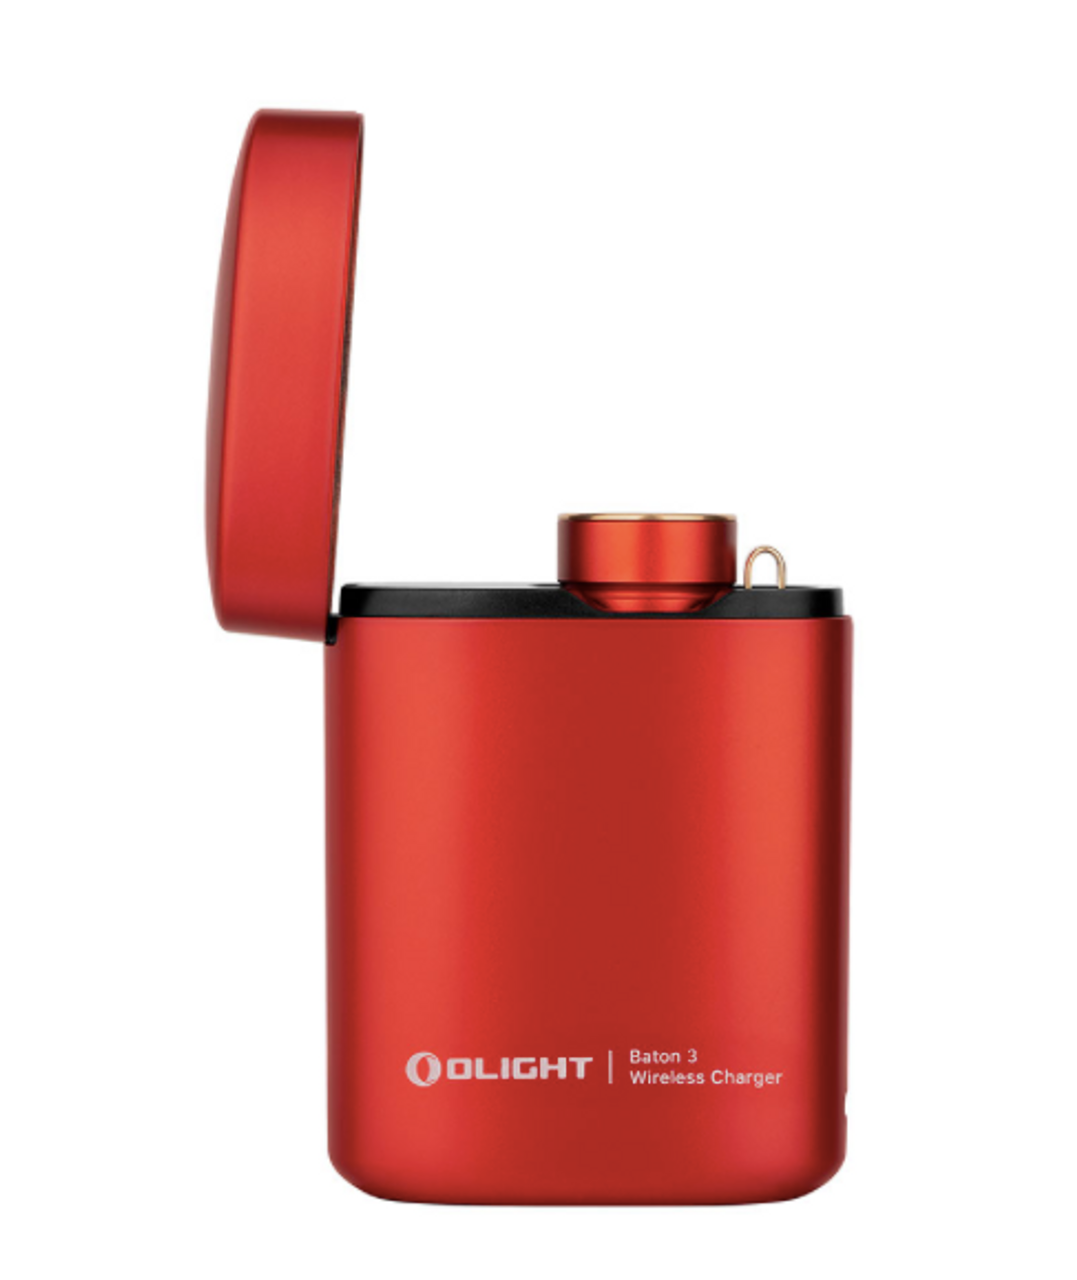 O'Light Baton w/ Wireless Charger- Red